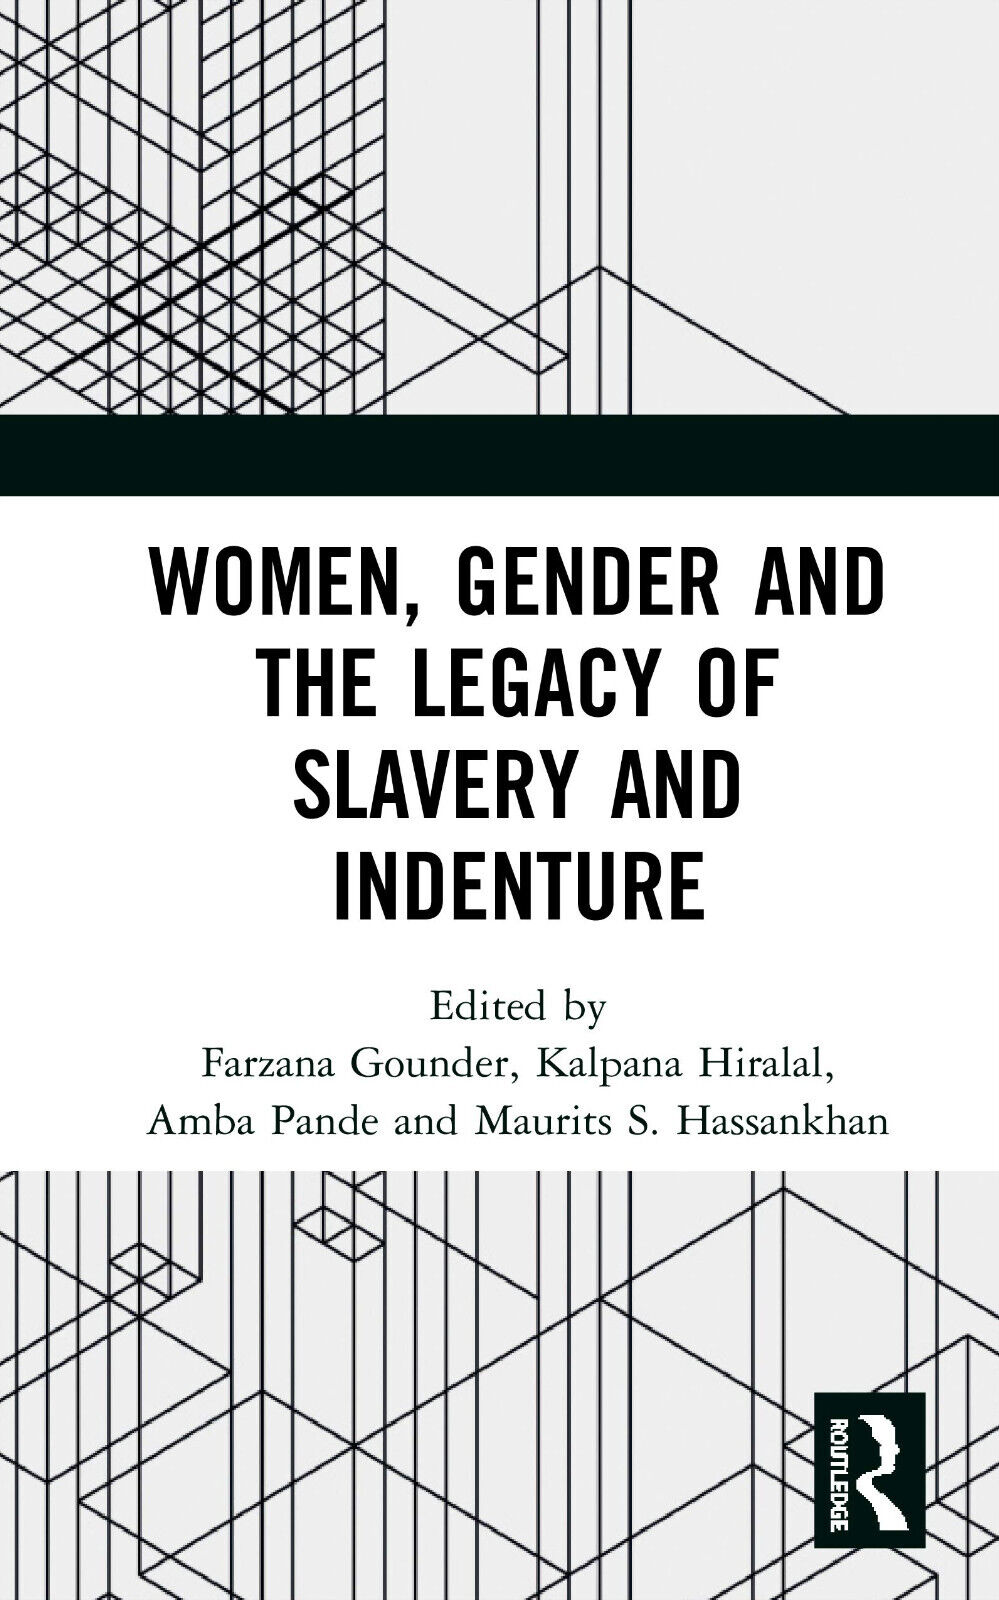 Women, Gender And The Legacy Of Slavery And Indenture - Farzana Gounder - 2020